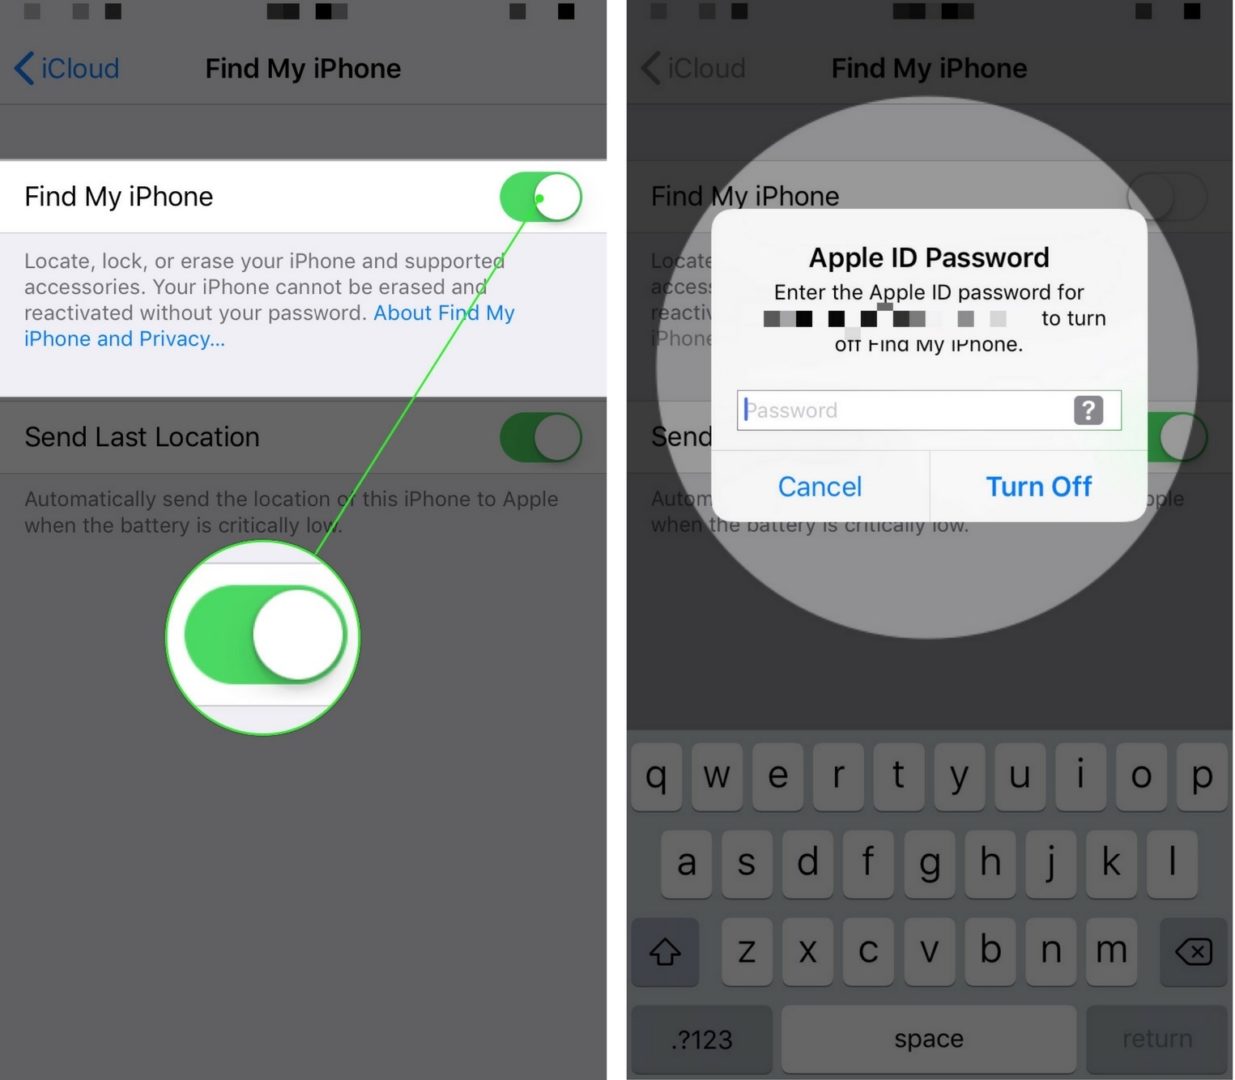 How Do I Turn Off Find My iPhone On an iPhone? Here